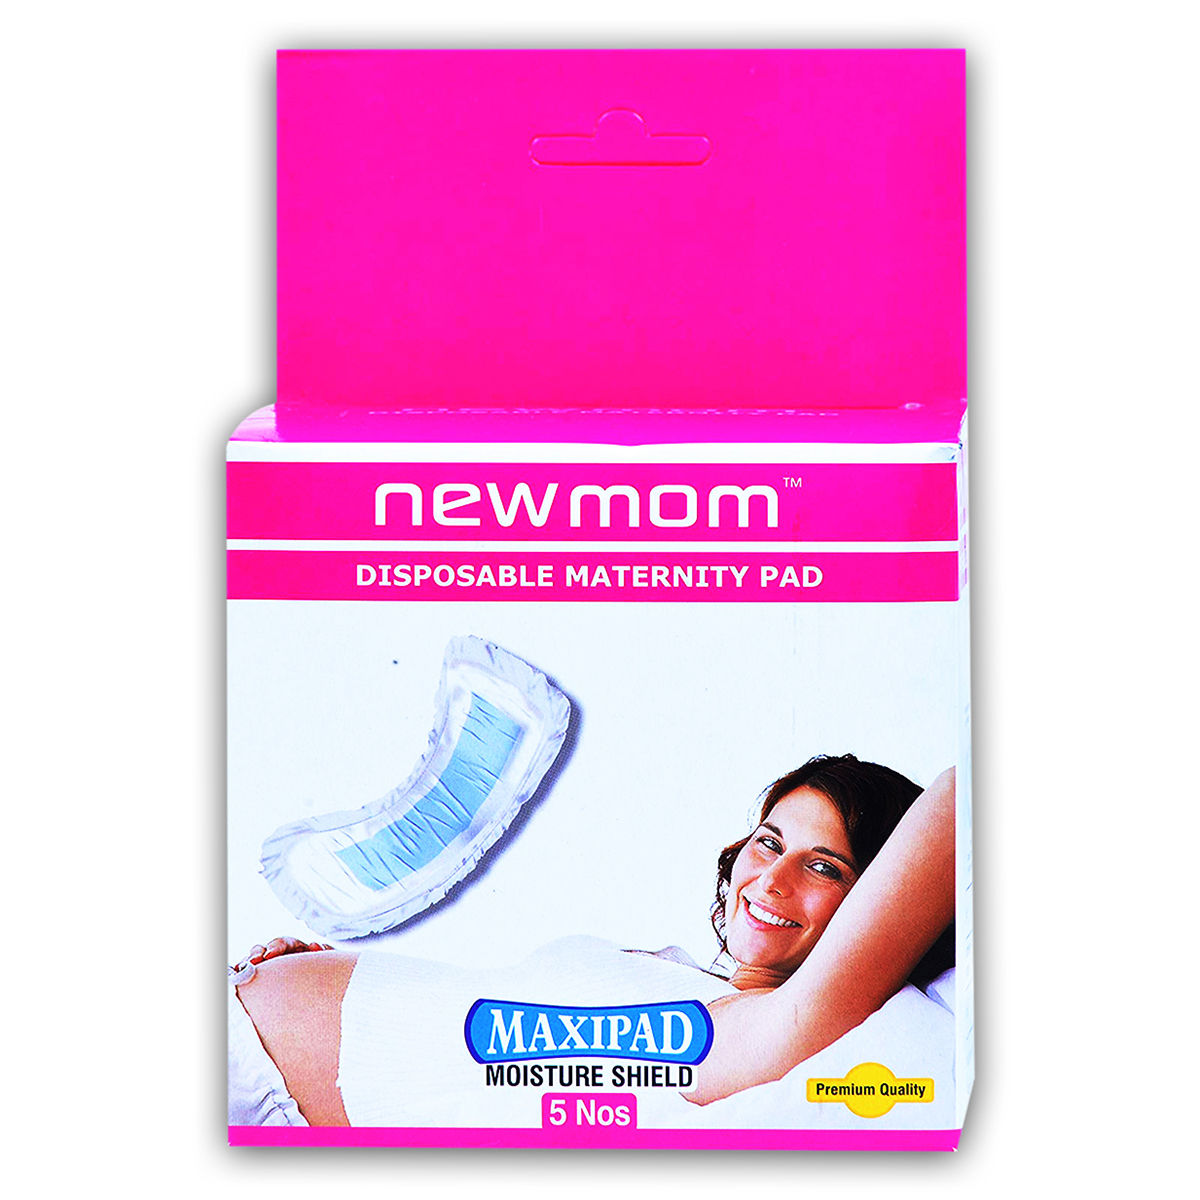 Newmom Disposable Maternity Maxipad Price, Uses, Side Effects